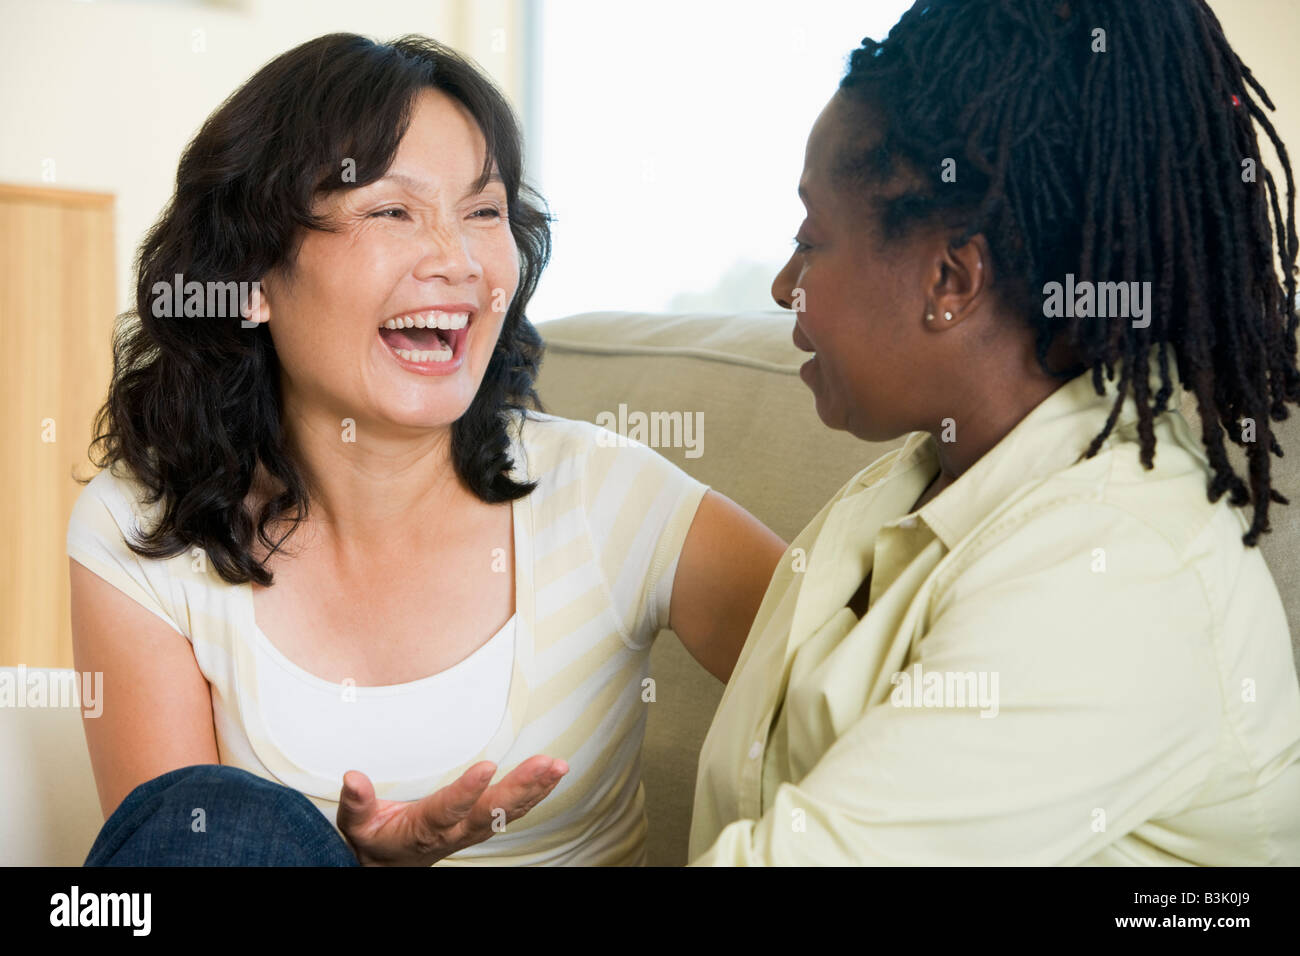 Two women talking in living room and smiling Stock Photo